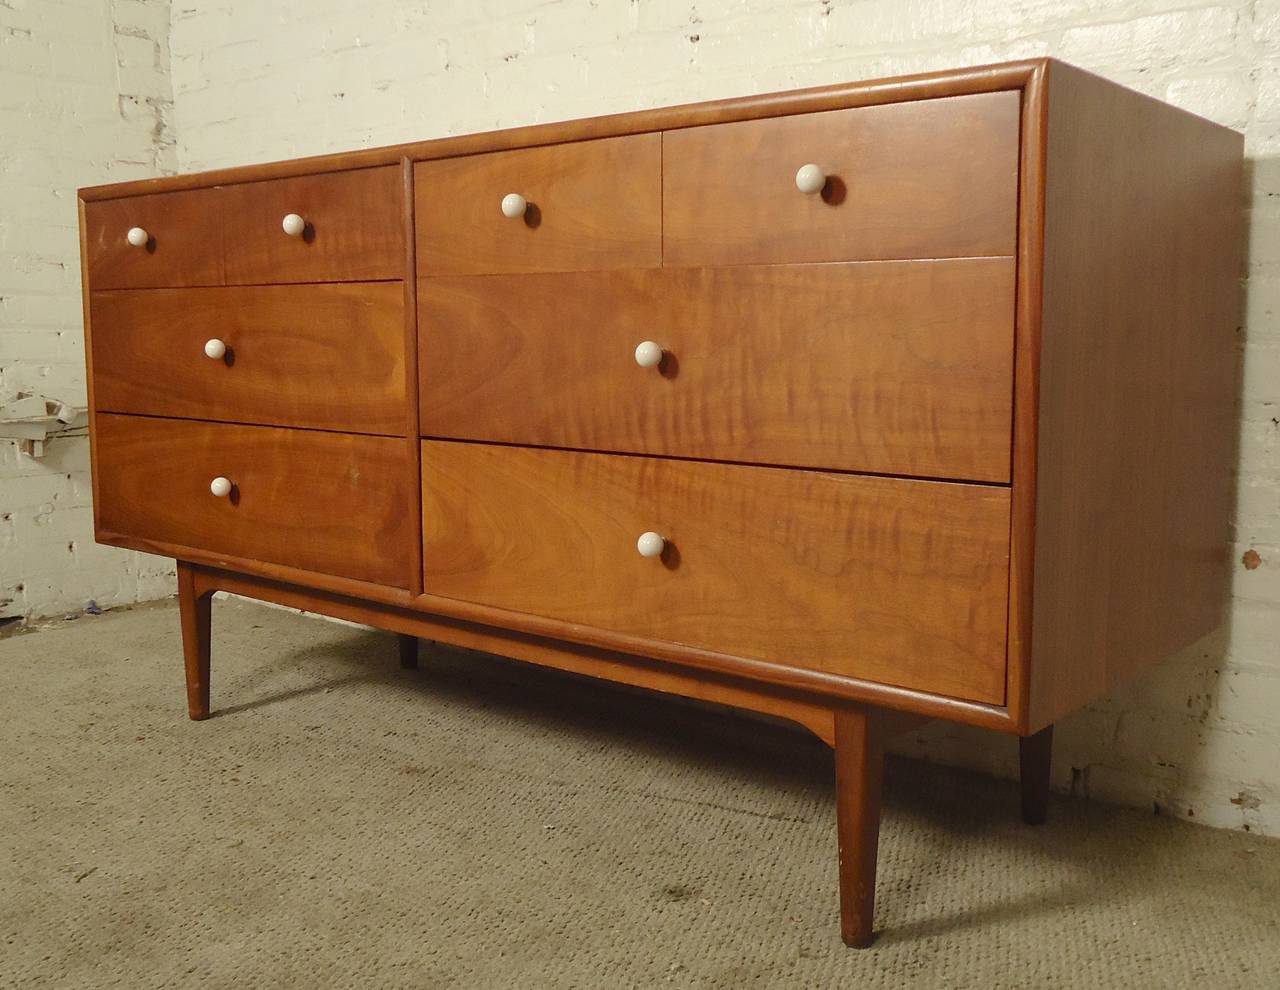 Attractive mid-century modern eight drawer dresser with walnut grain, accented with milk white glass handles. Great design and function.

(Please confirm item location - NY or NJ - with dealer)